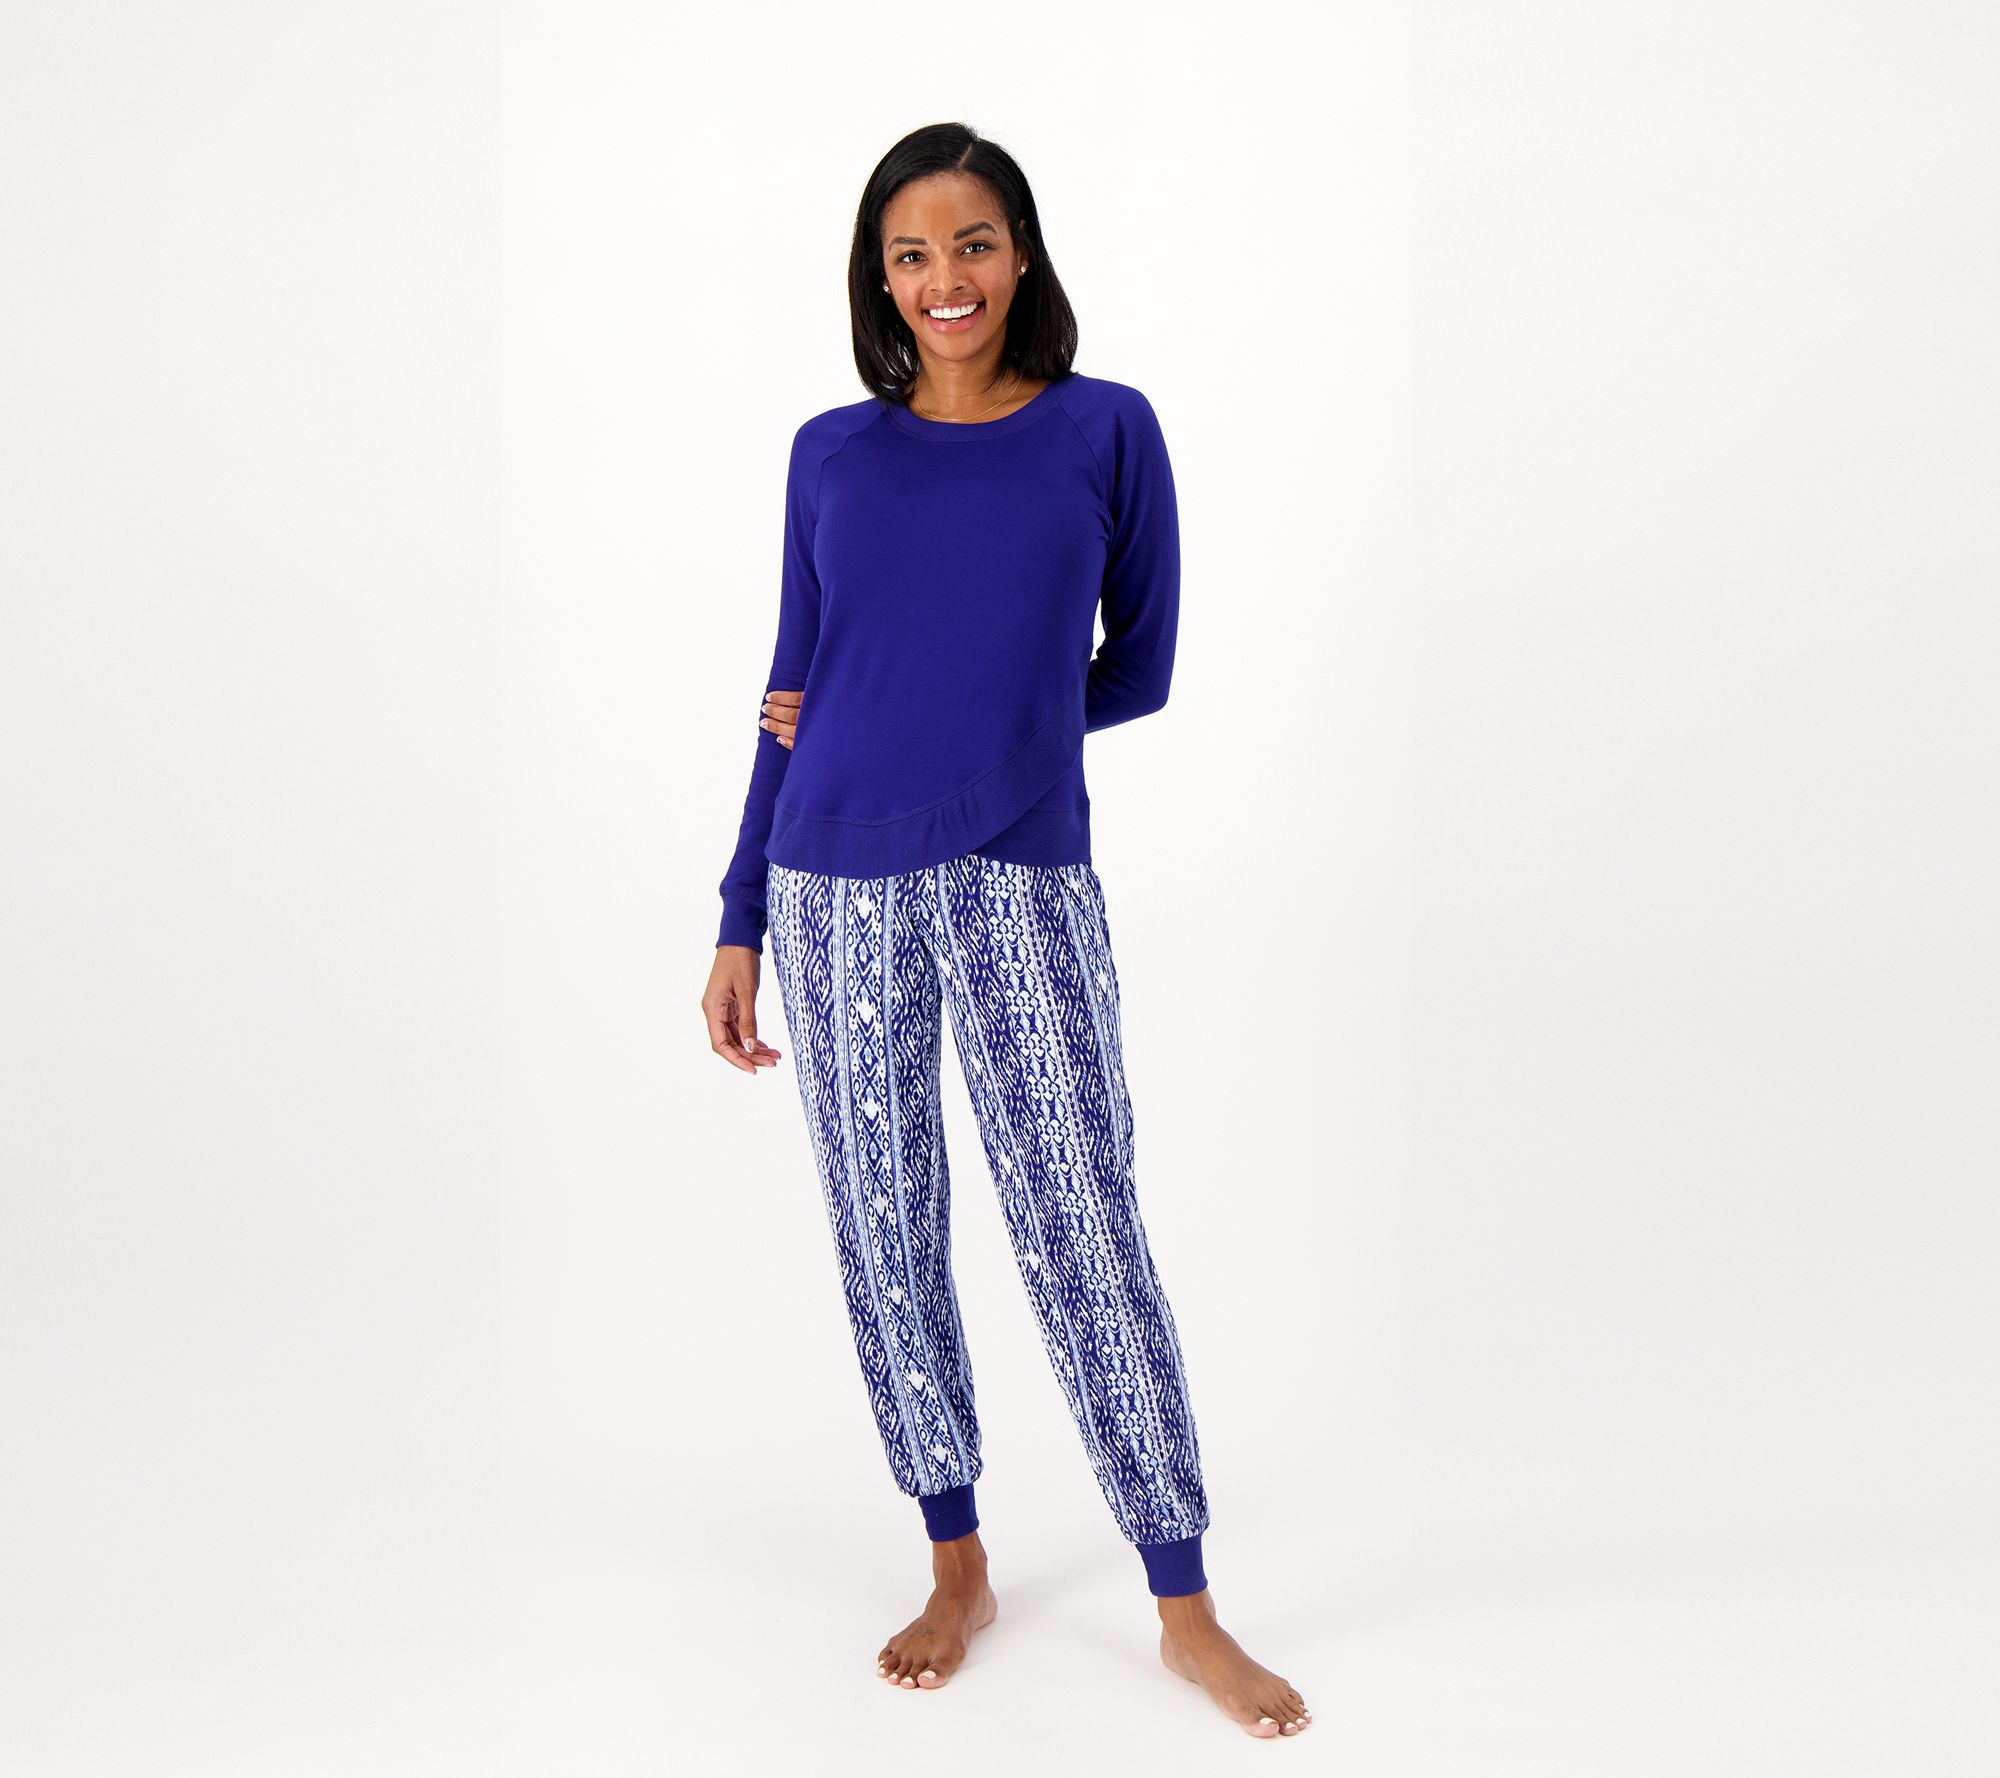 MUK LUKS French Terry Top and Butter Knit Jogger Set - QVC.com